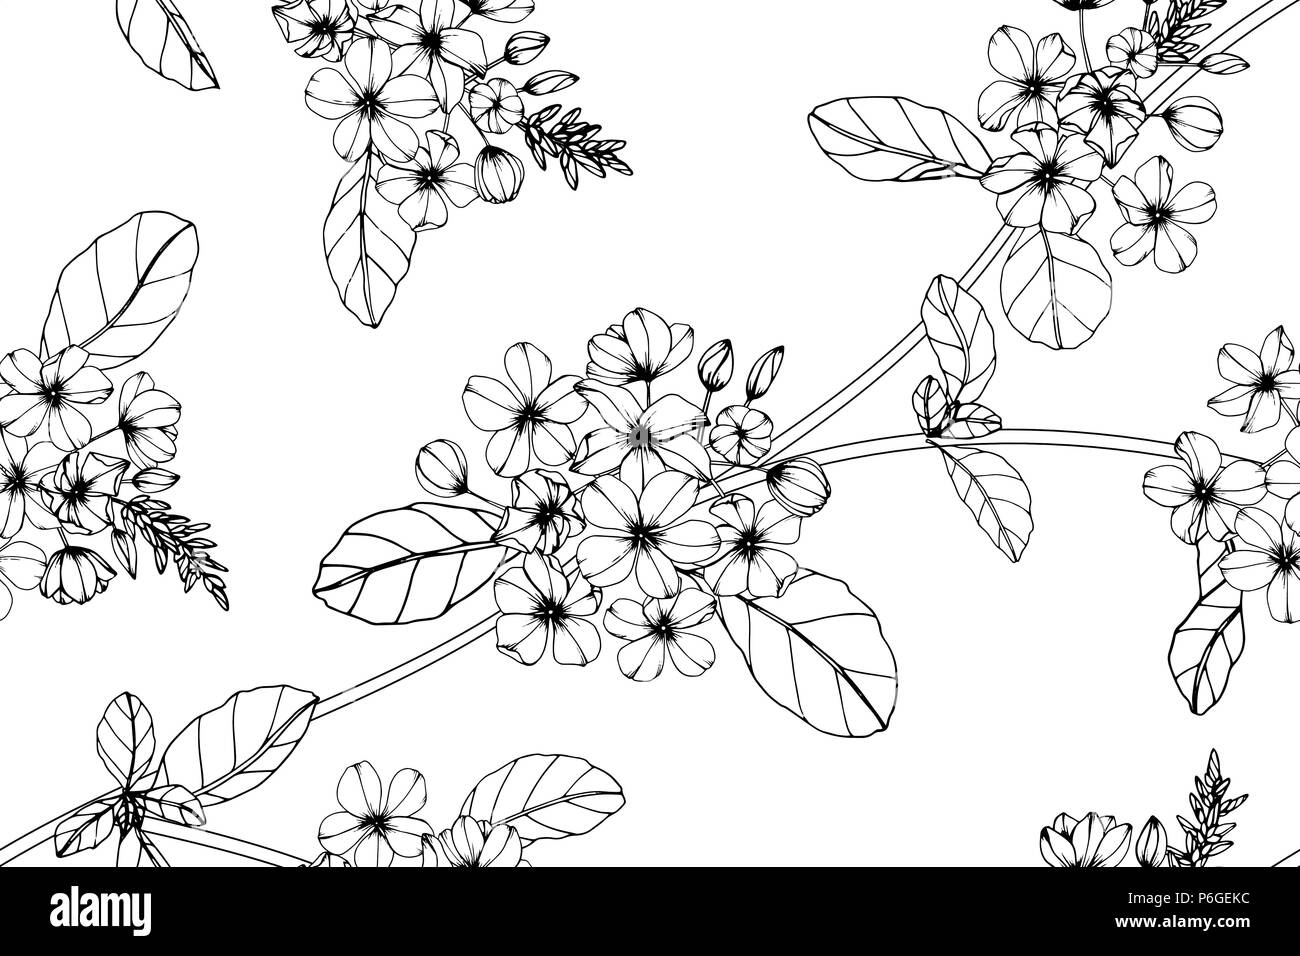 Seamless Cap leadwort flower pattern background. Black and white with drawing line art illustration. Stock Vector